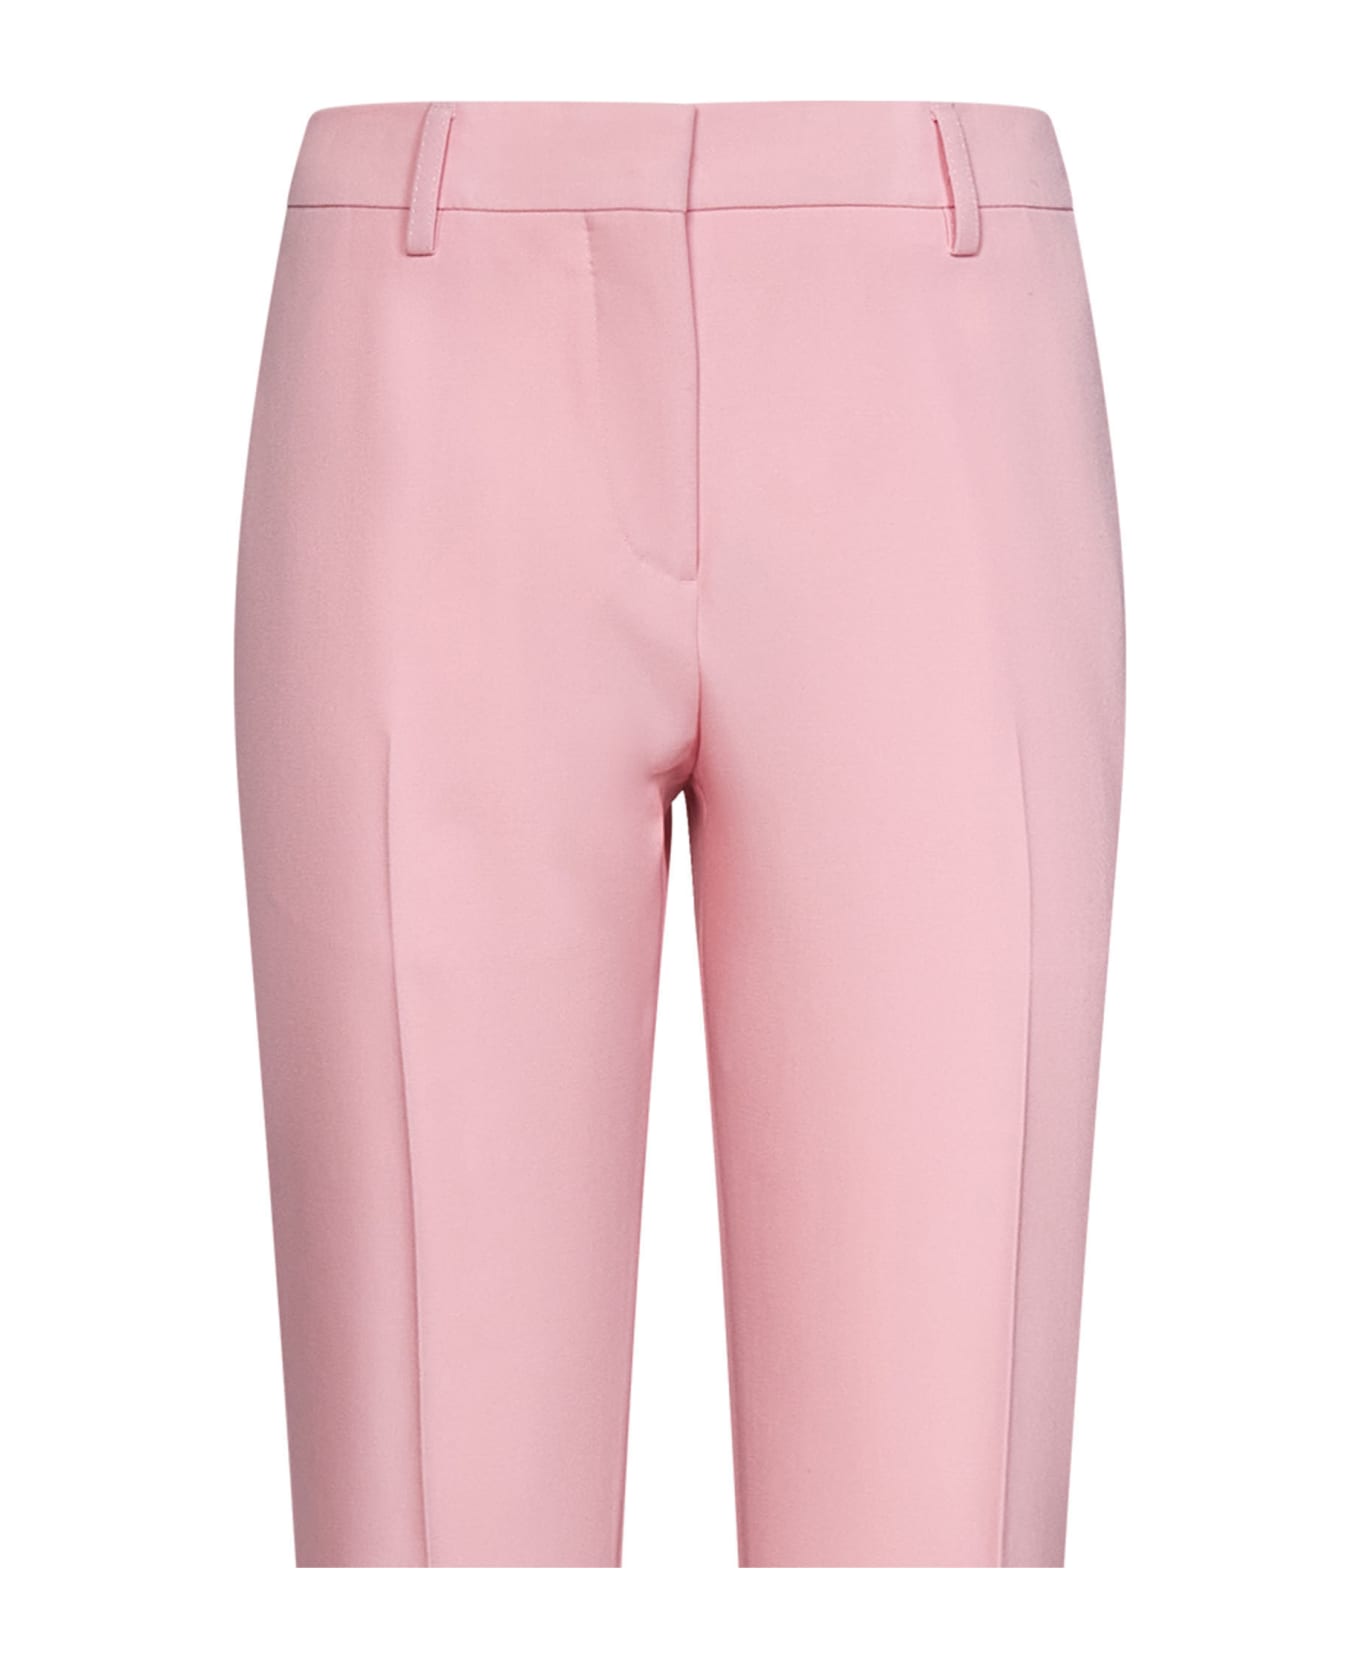 Burberry Trousers - Pink